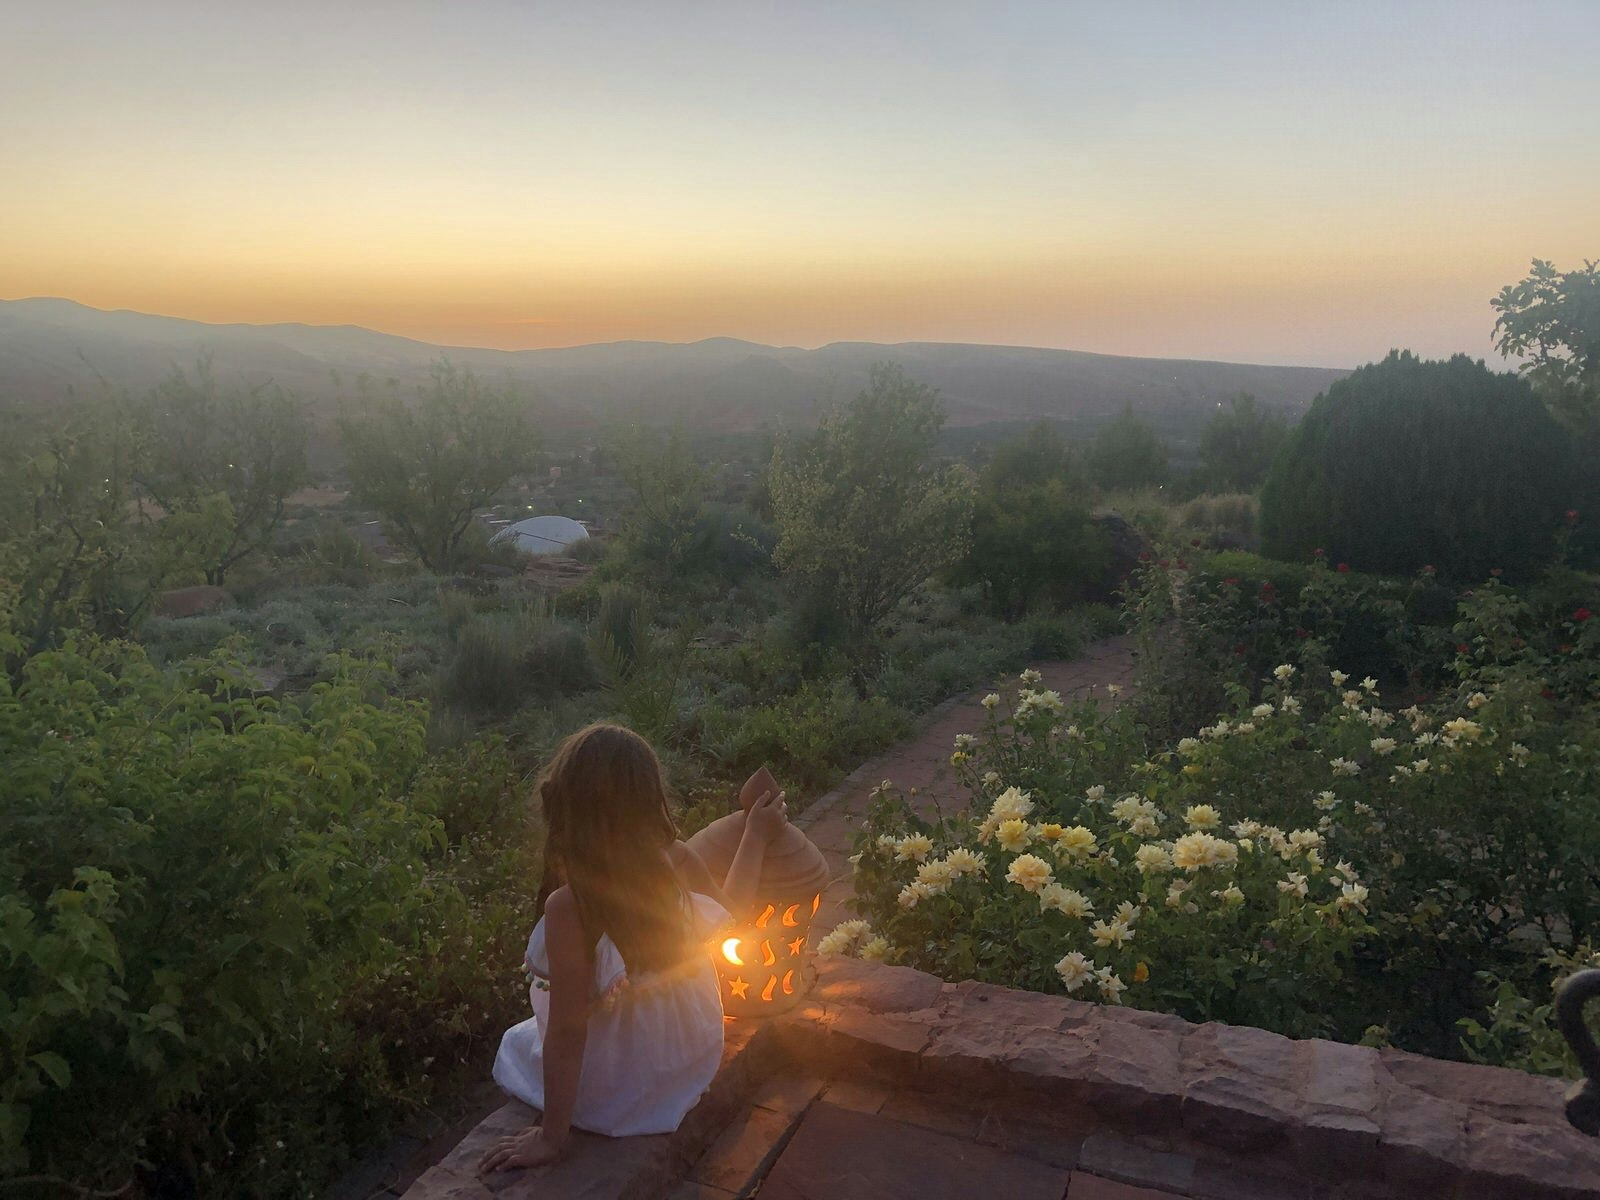 A young girl sits next to a lantern and looks out over a hazy landscape to the sunset in the distance.